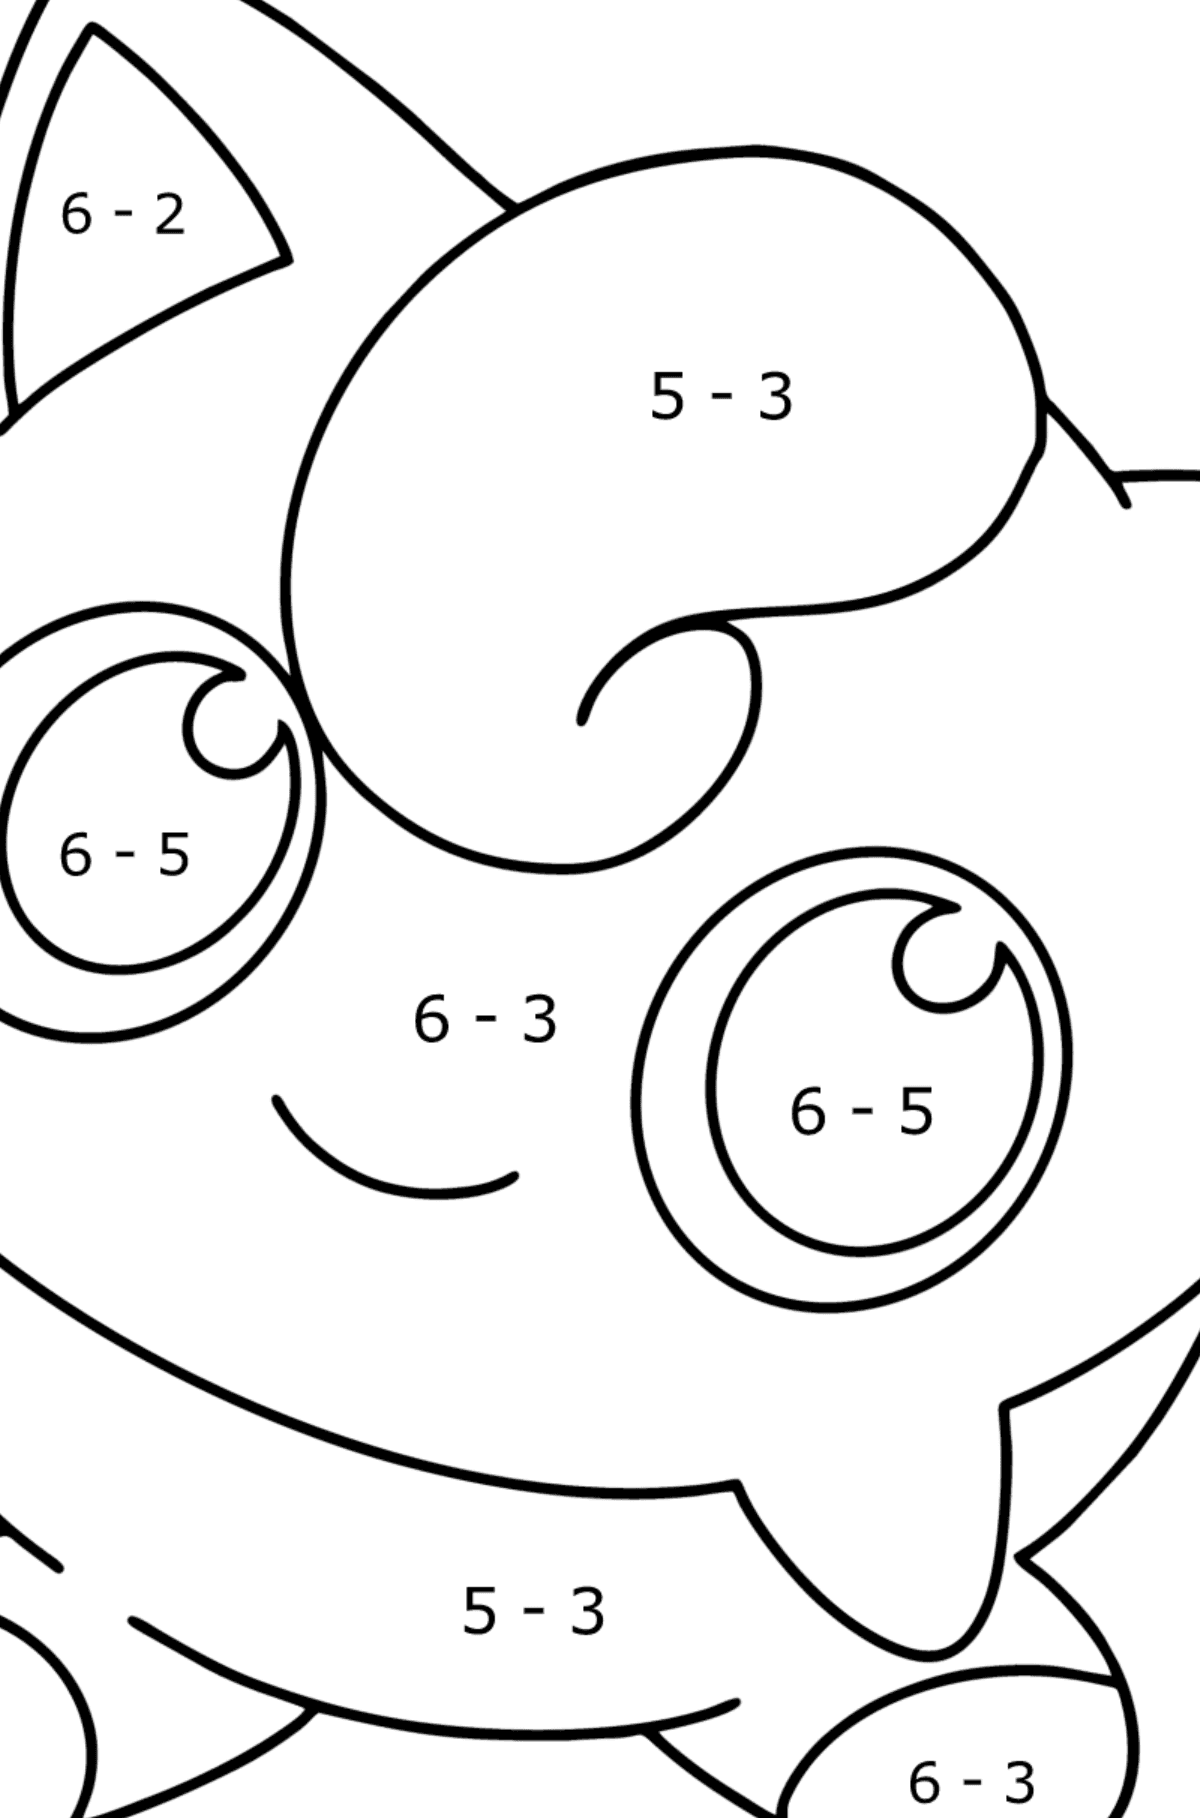 Coloring page Pokémon Go Jigglypuff - Math Coloring - Subtraction for Kids